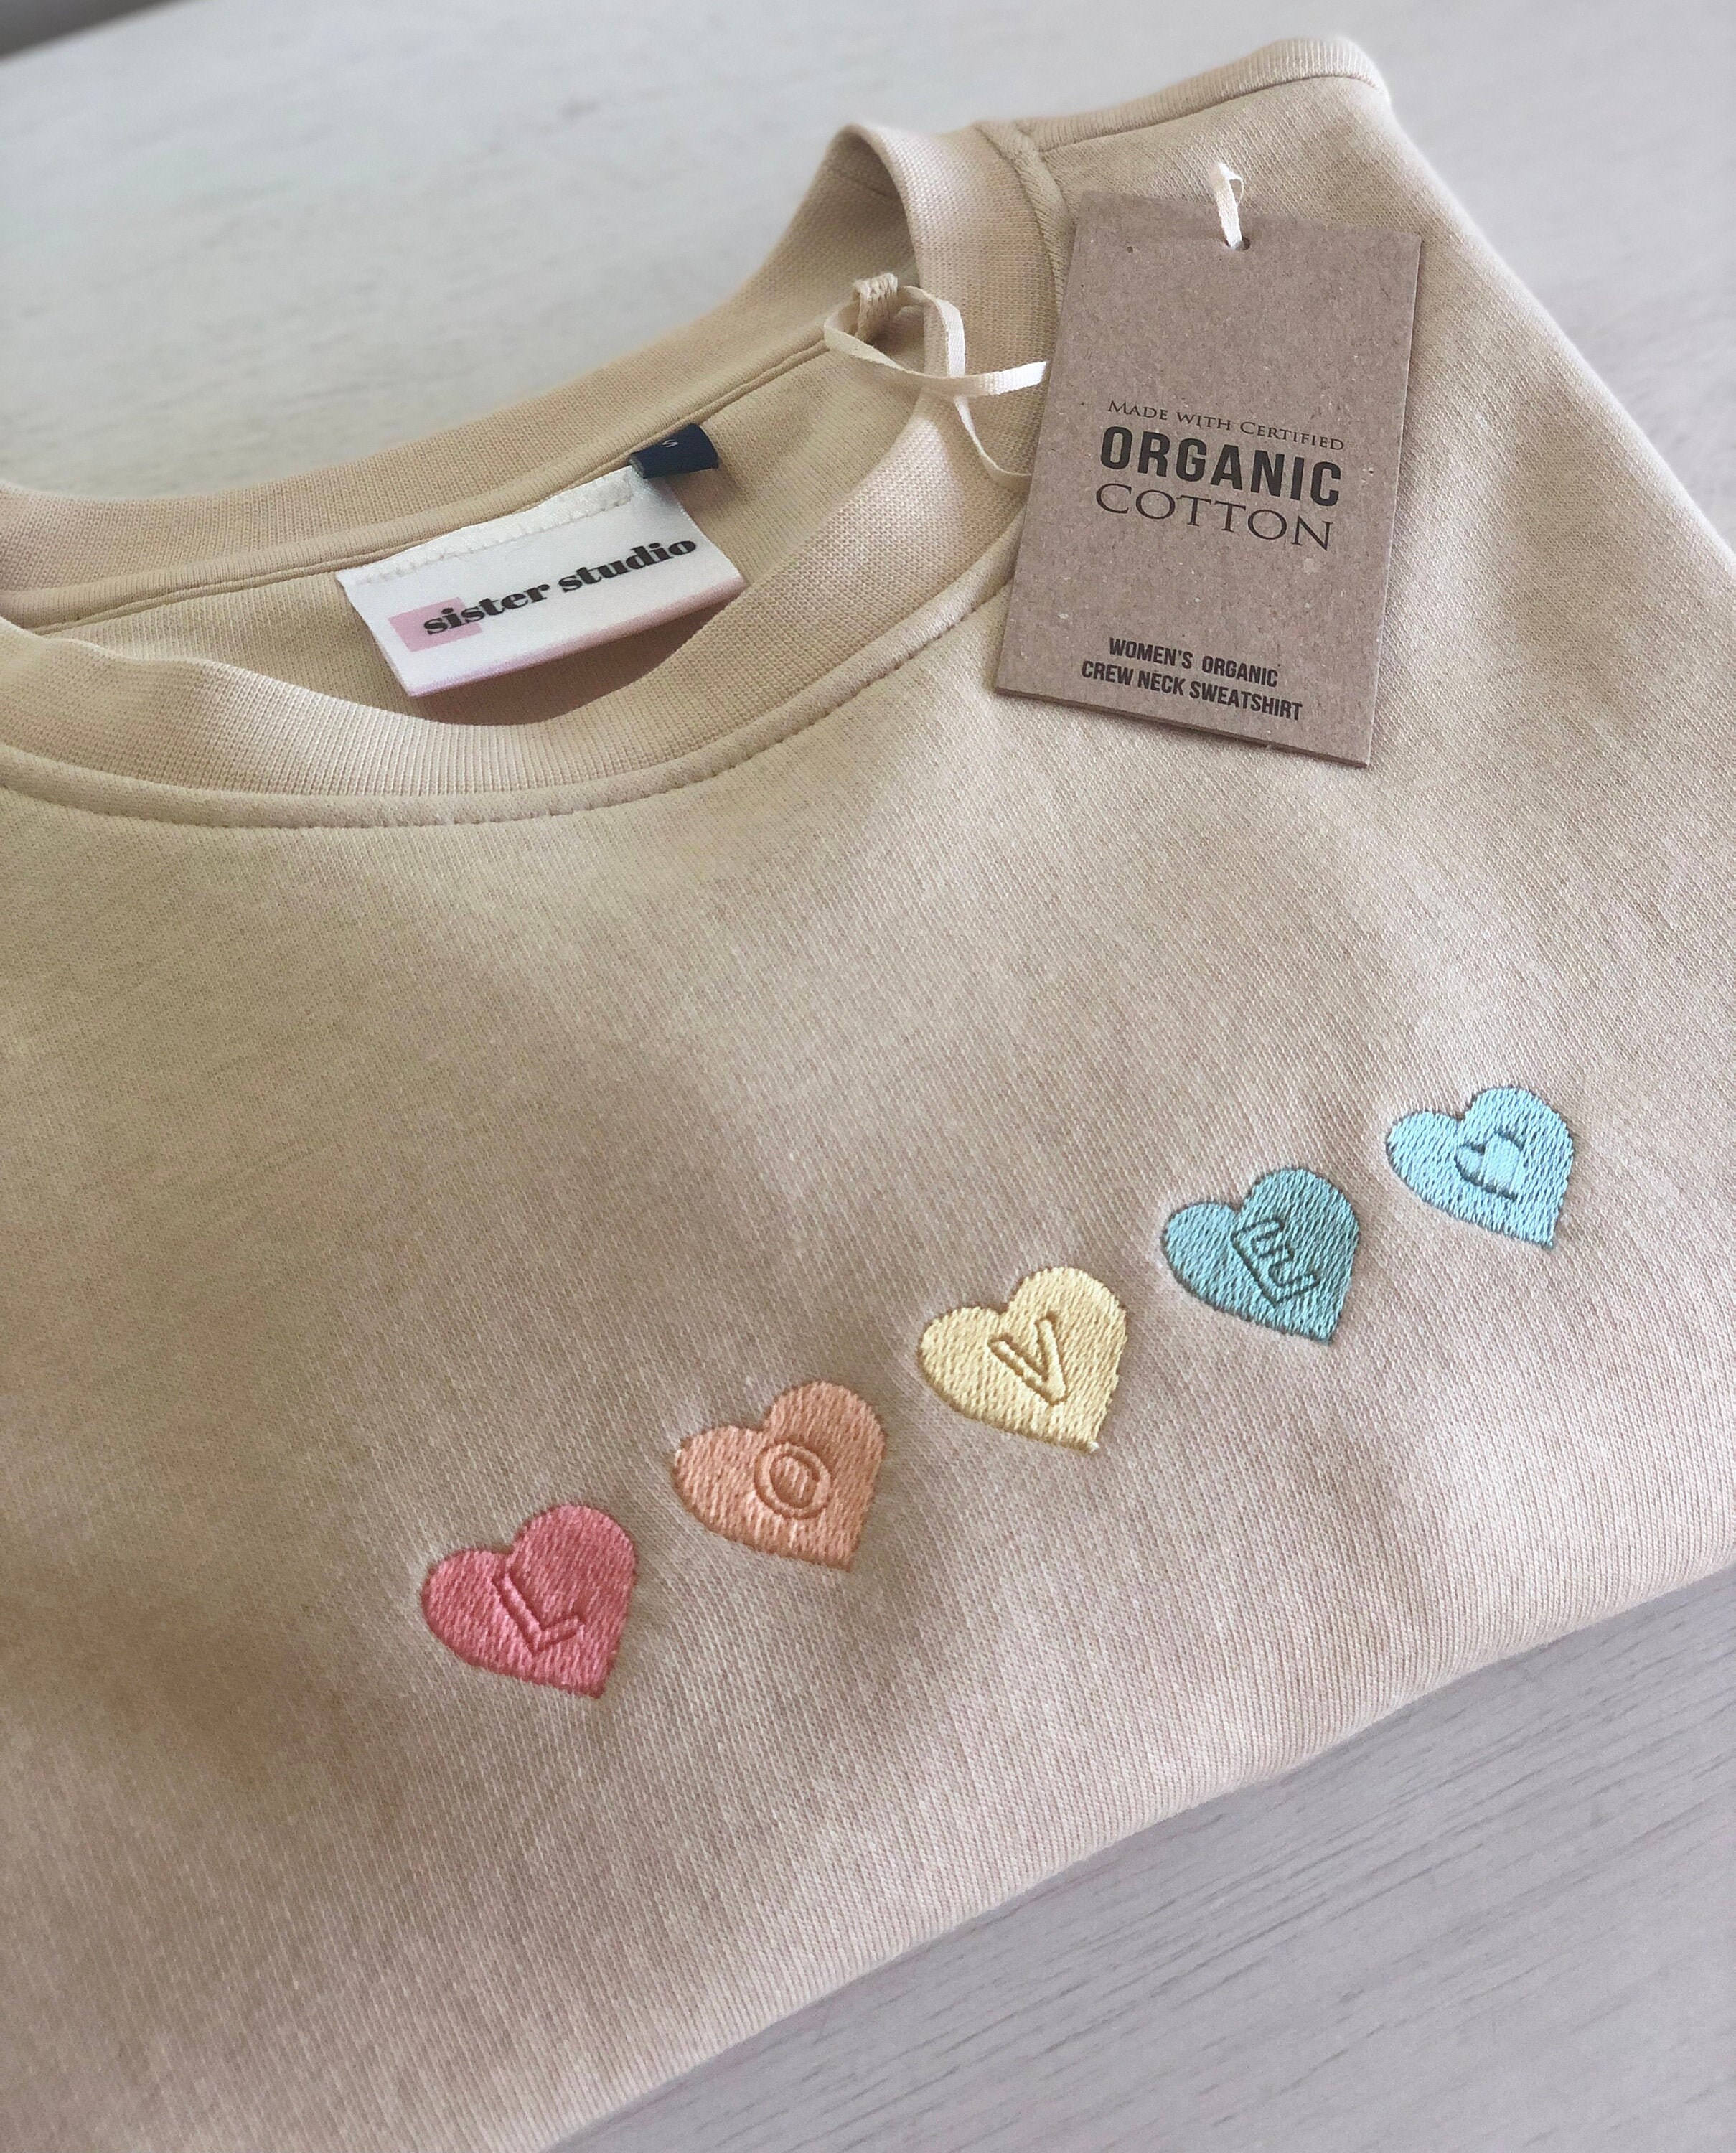 Embroidered Stamped Love Organic Cotton Sweatshirt - Etsy